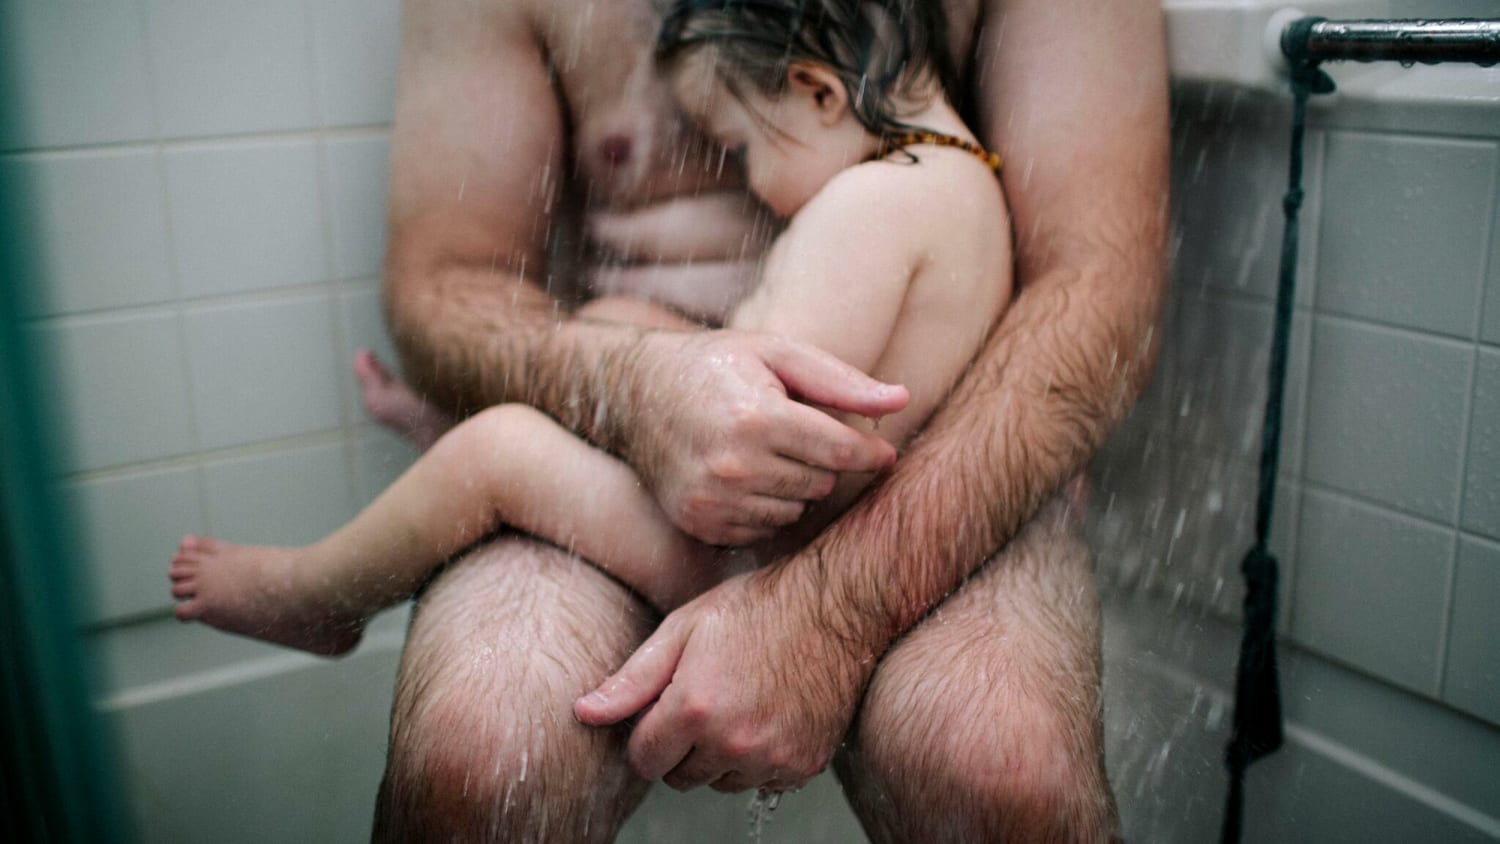 Dad and son shower together